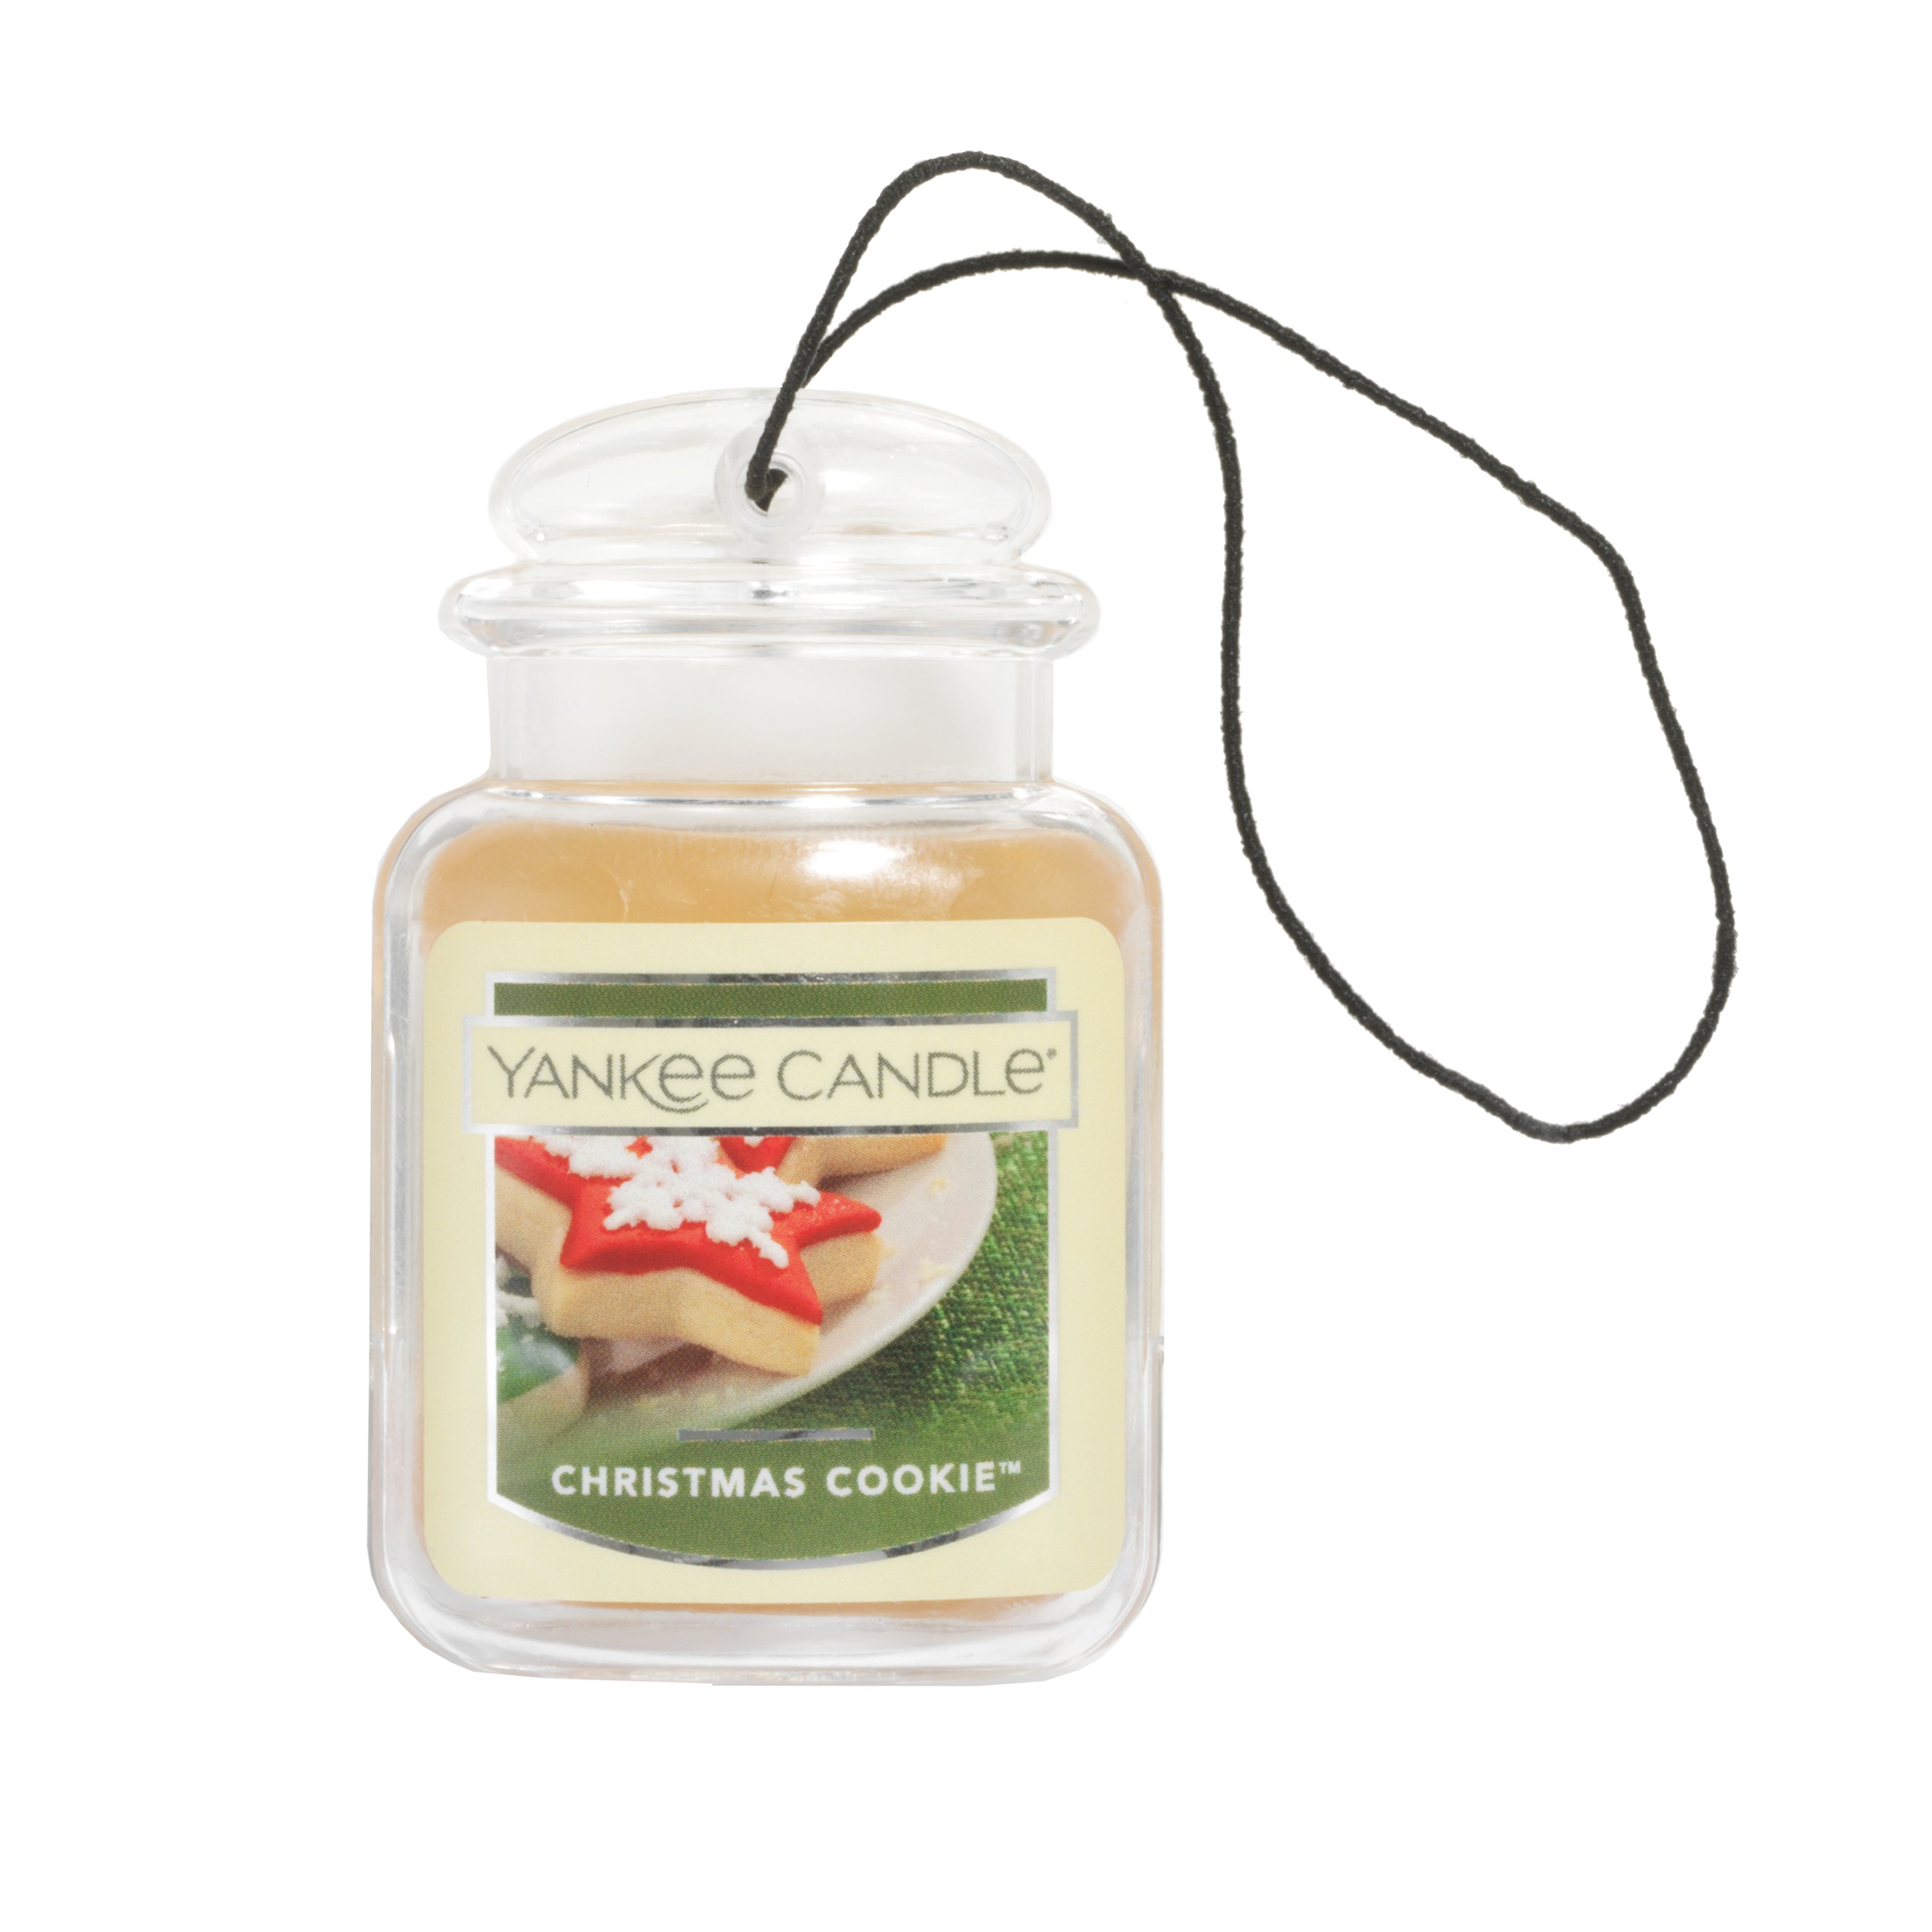 Yankee Candle Christmas Cookie Small Jar Candle